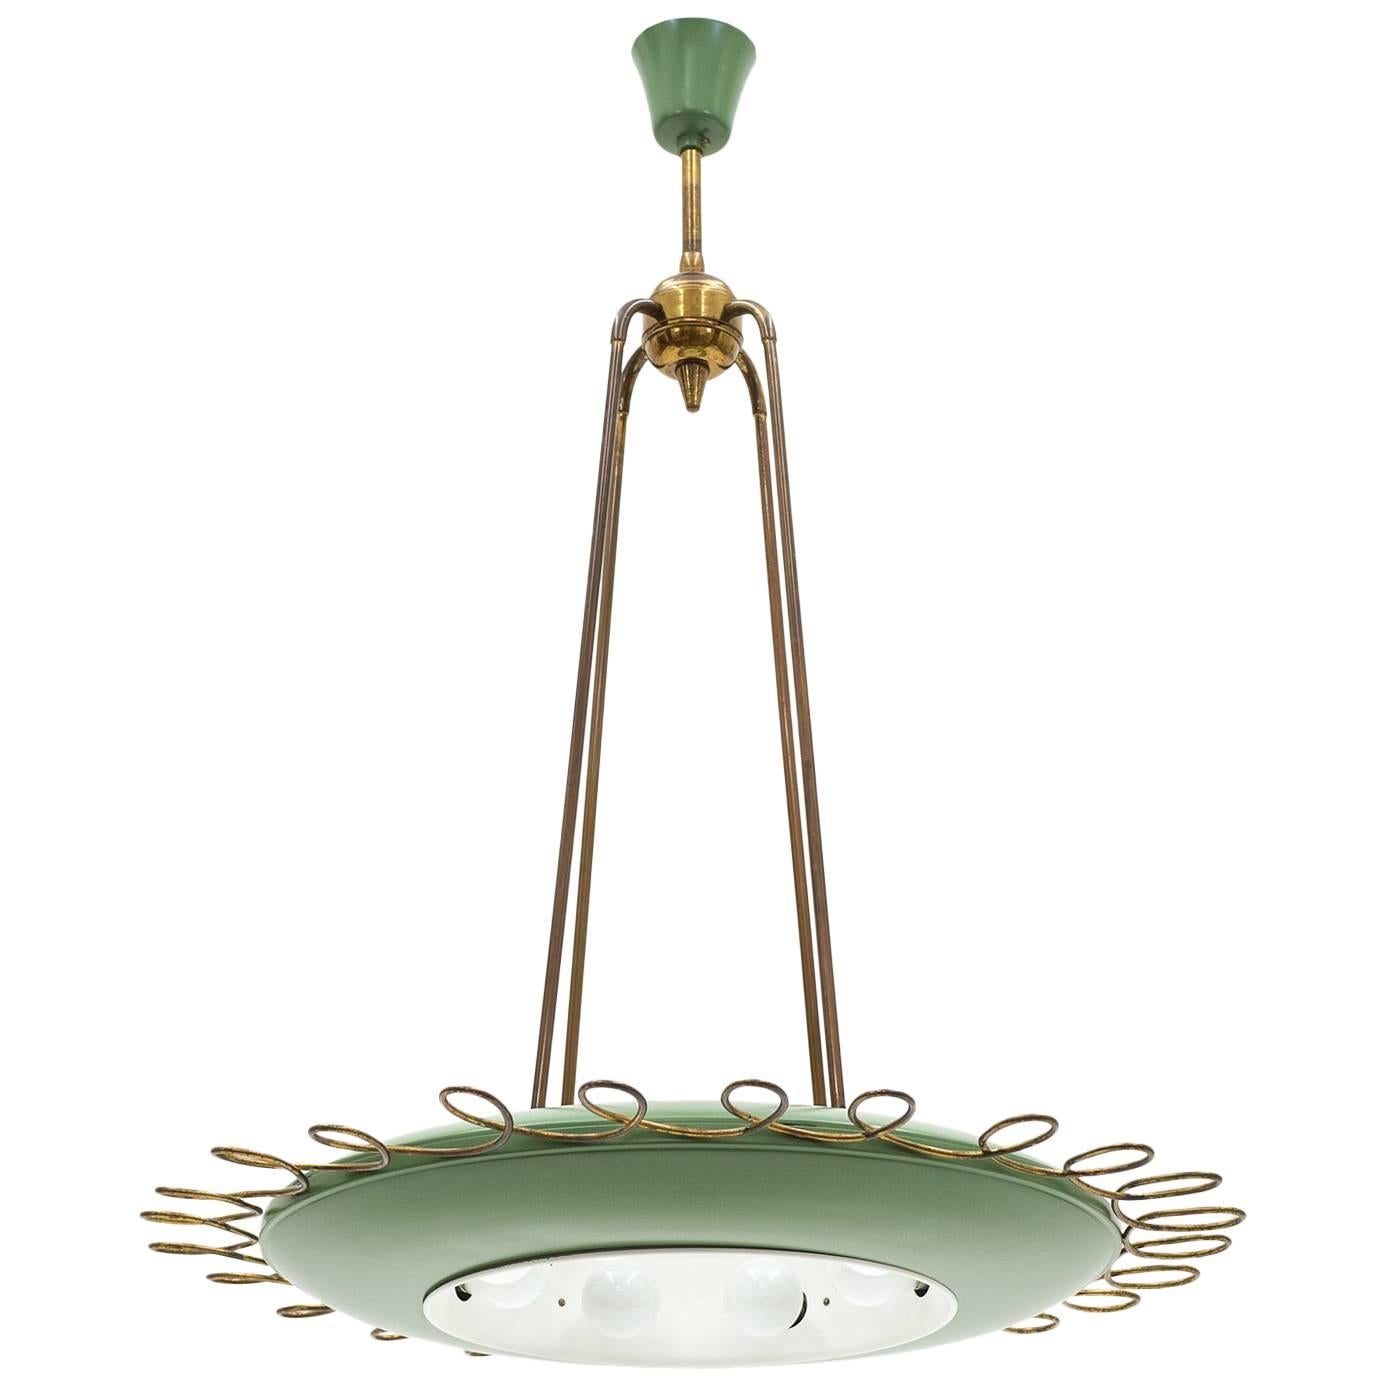 Italian Brass and Lacquered Aluminium Chandelier, 1950s